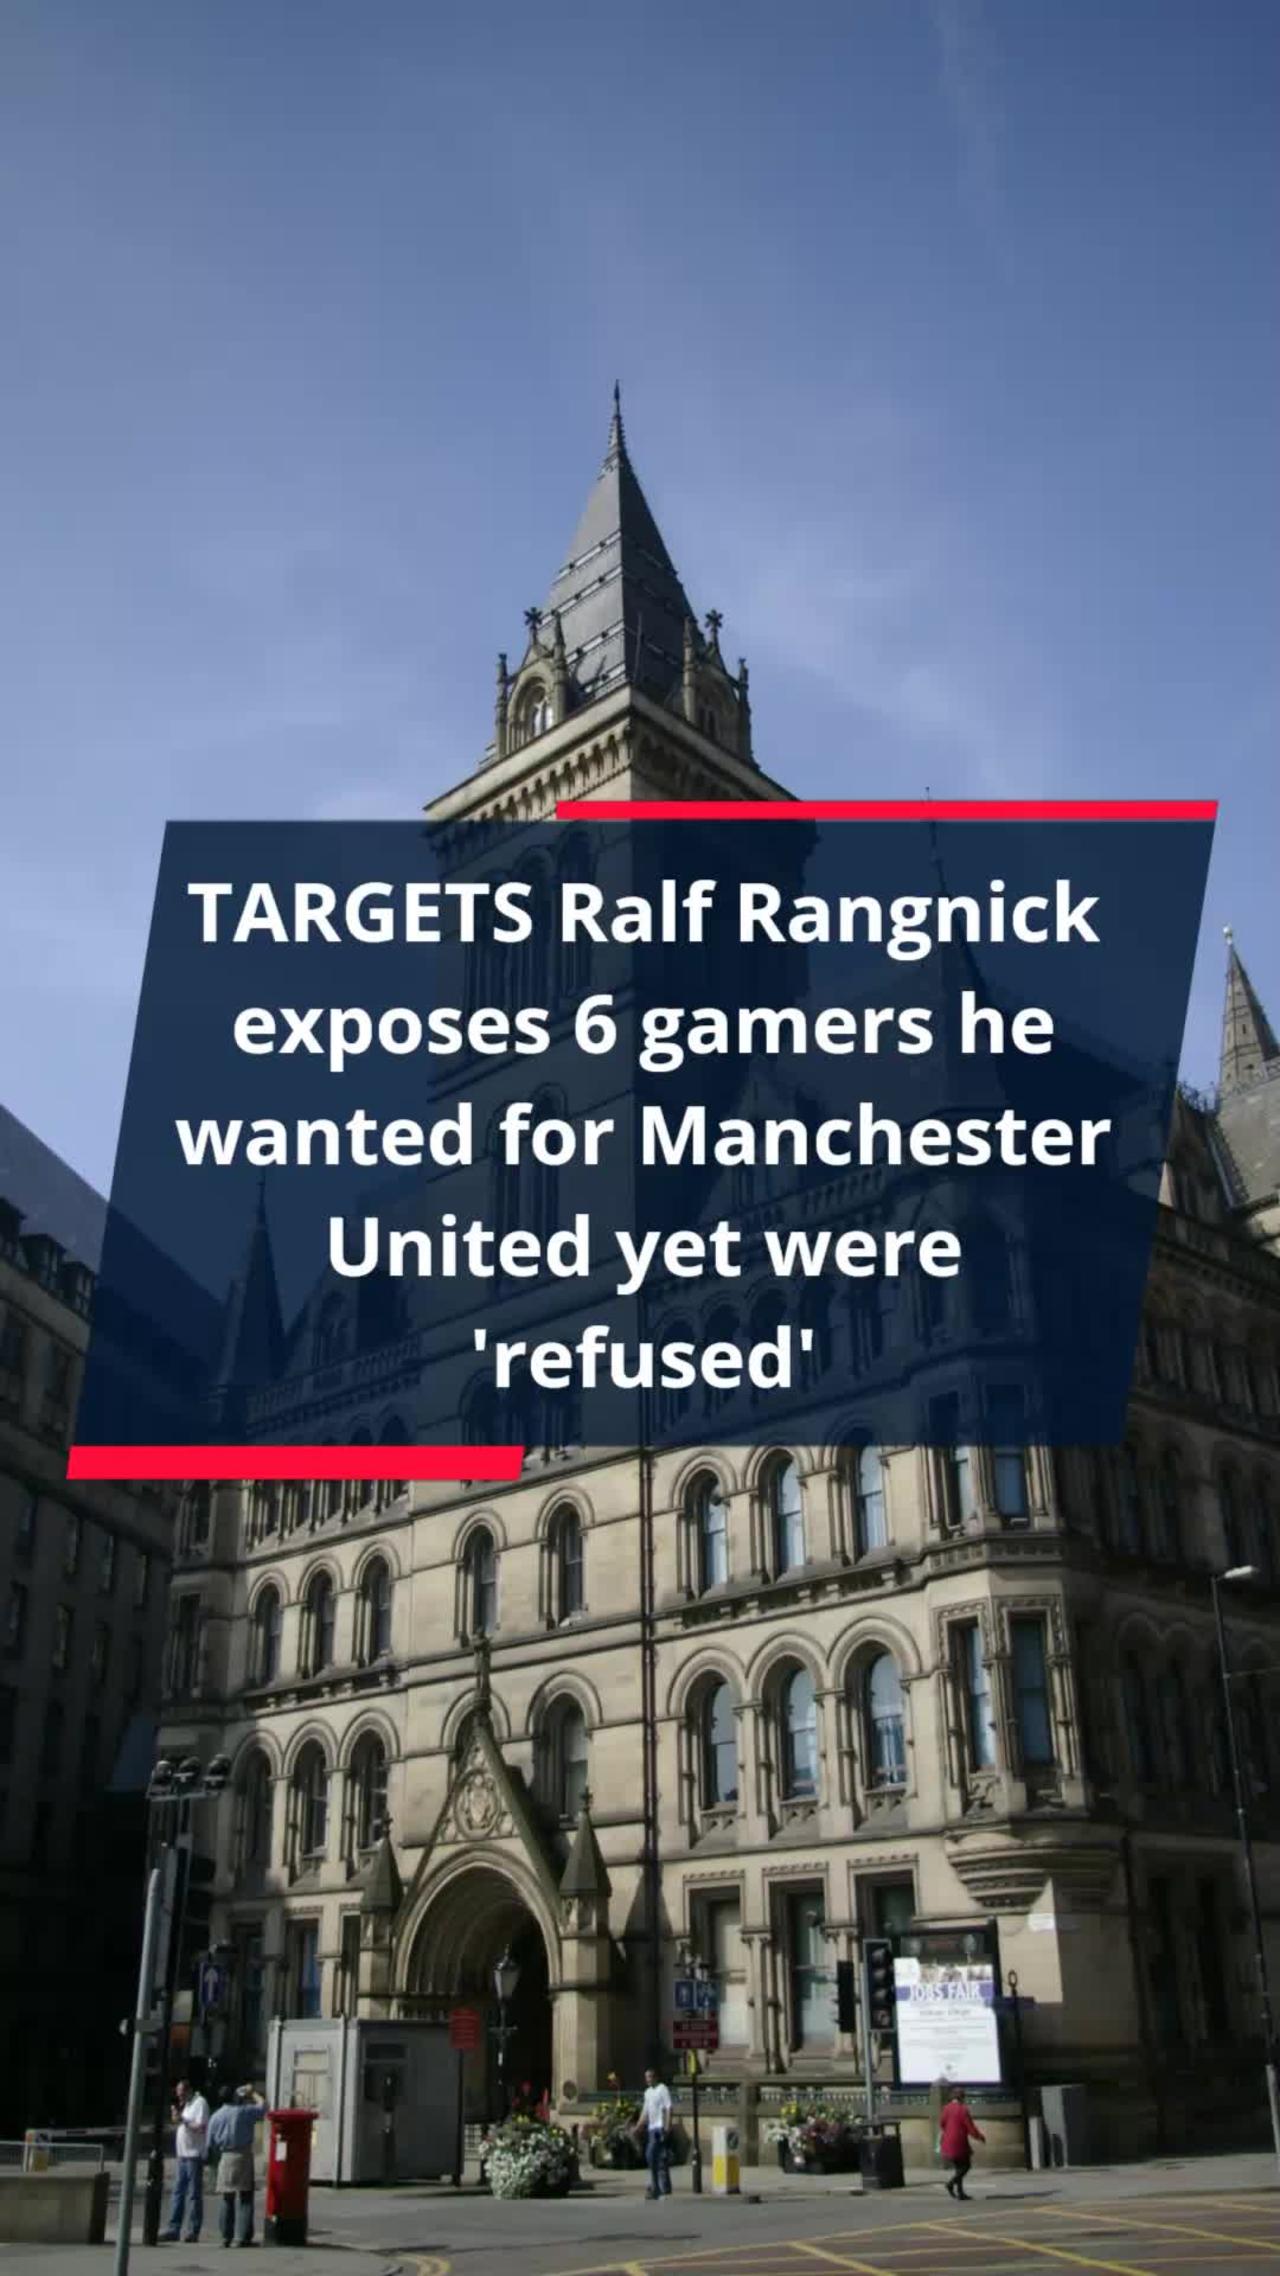 Ralf Rangnick exposes 6 gamers he wanted for Manchester United yet were 'refused